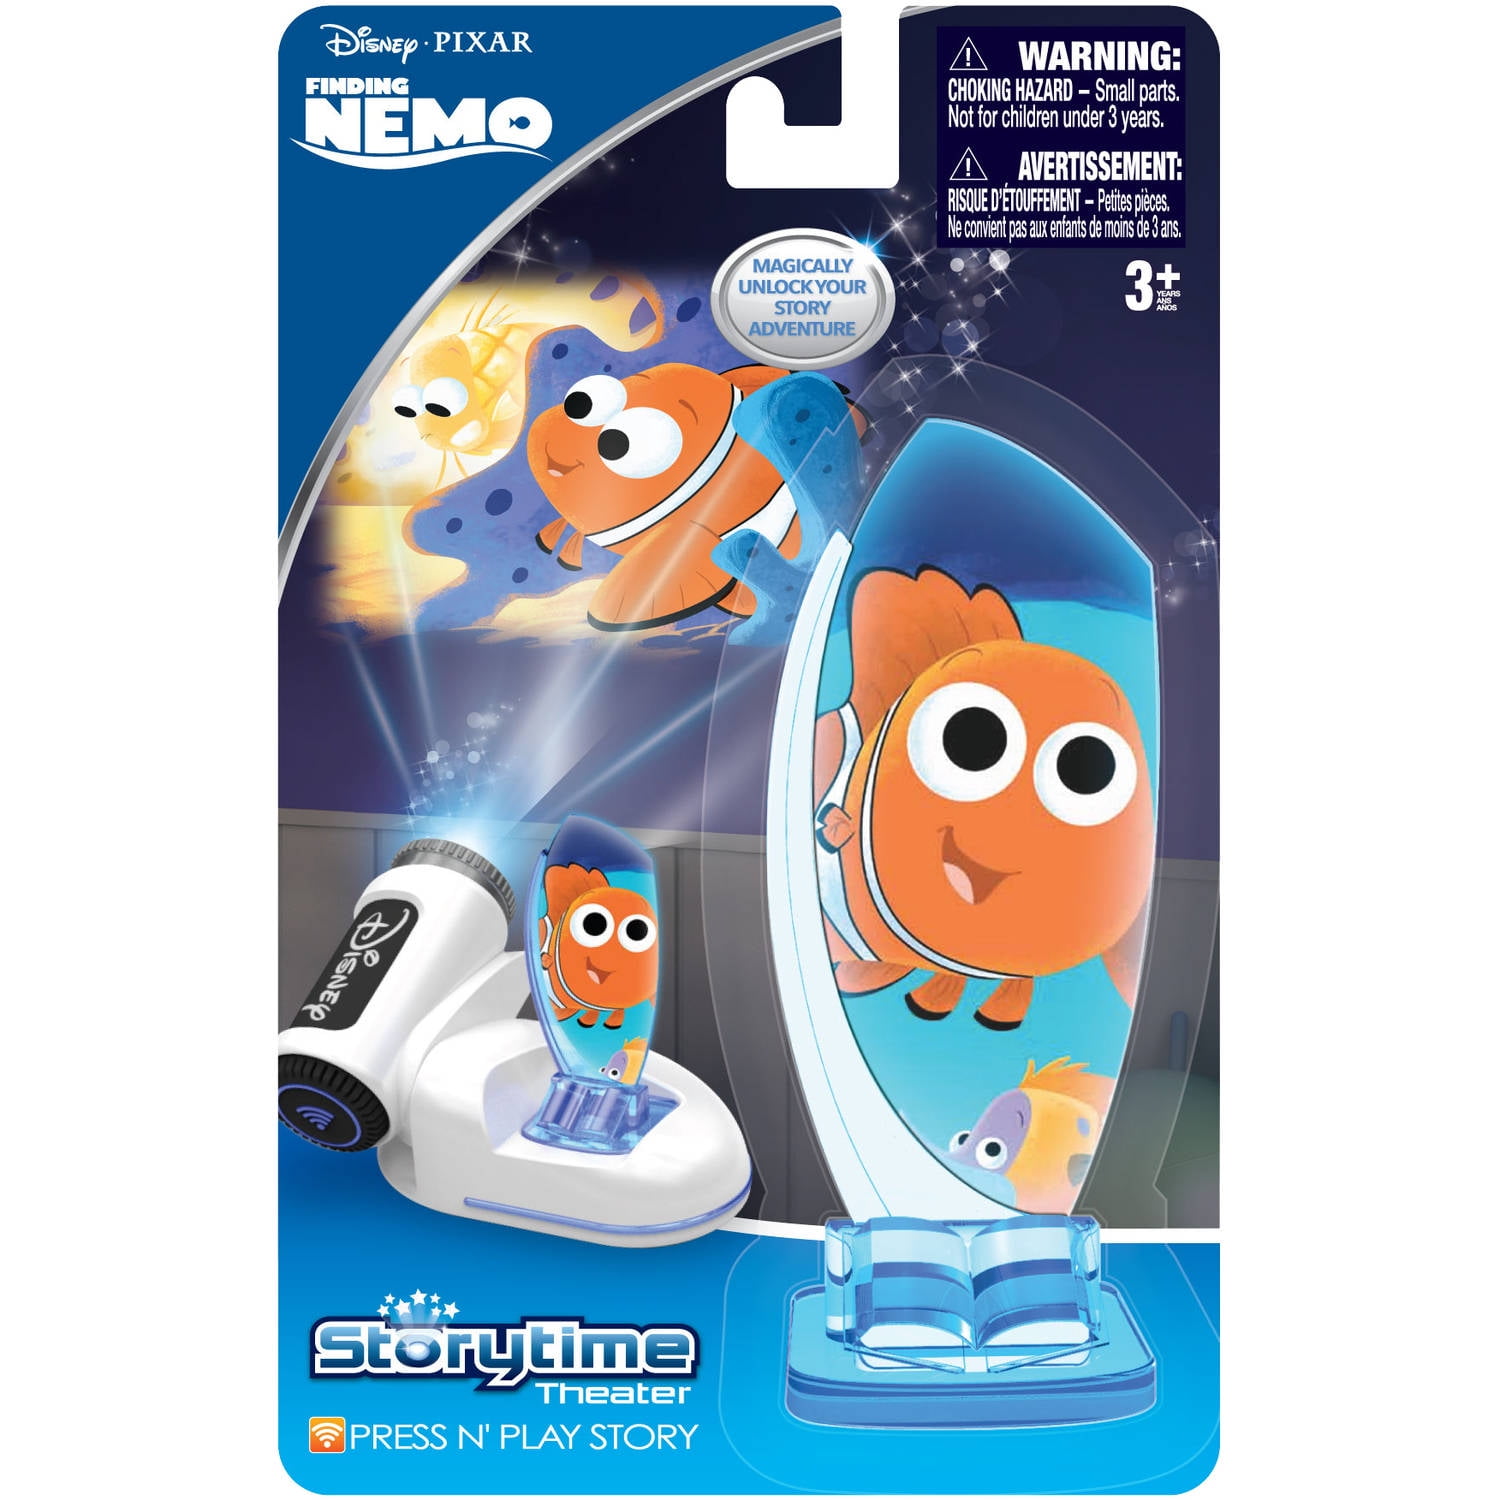 Finding Nemo Storytime Theater 4.5" Cartridge 